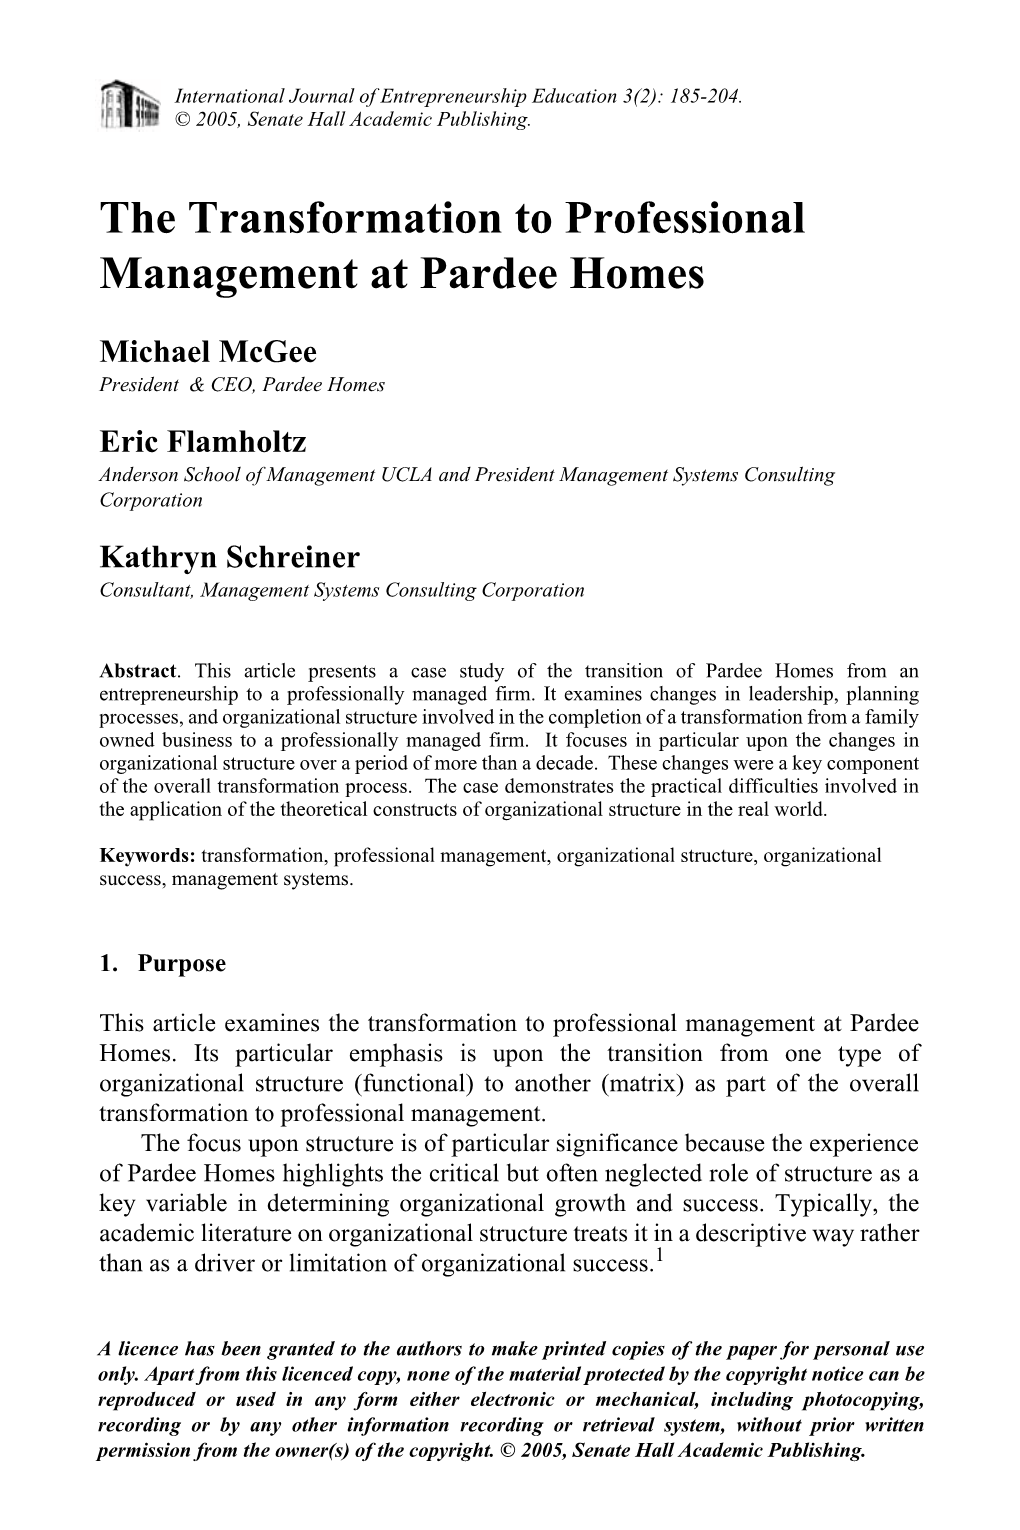 The Transformation to Professional Management at Pardee Homes